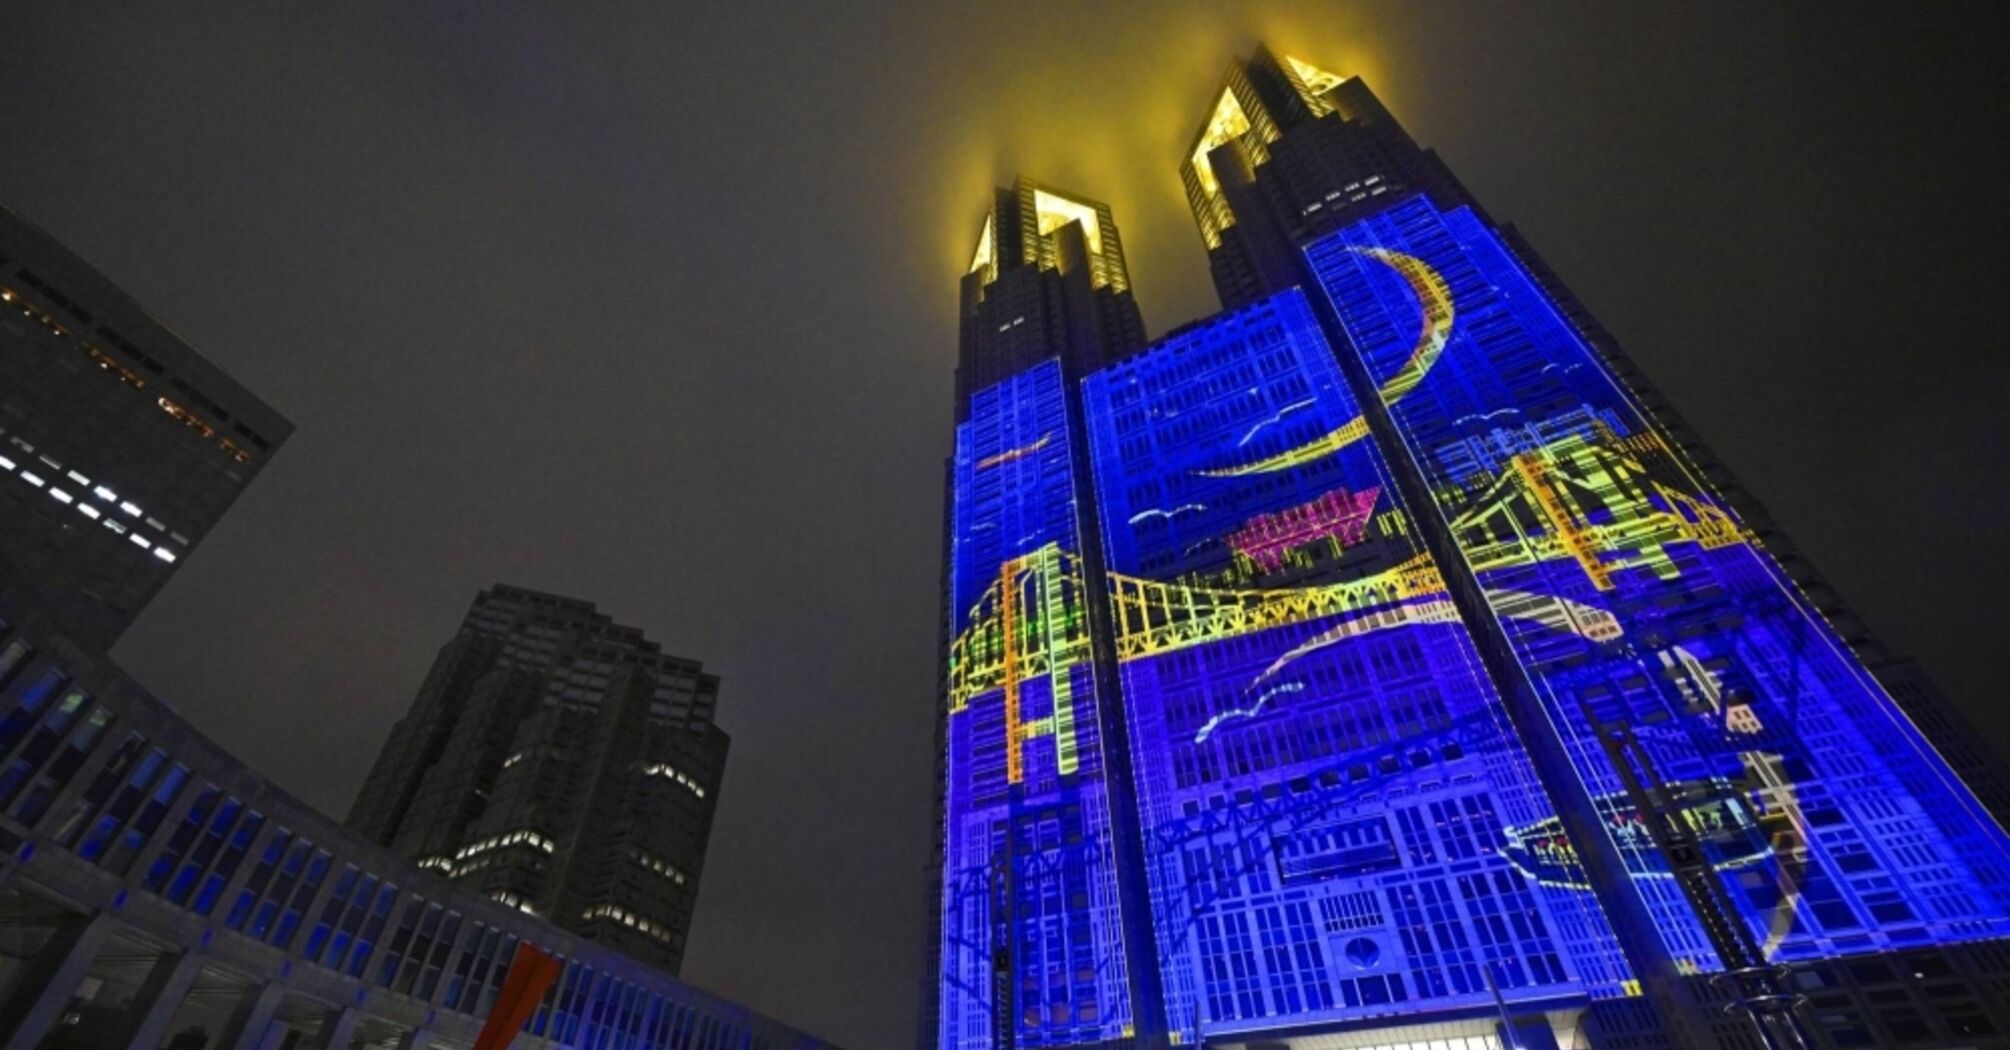 Tokyo presents the largest light show of its kind